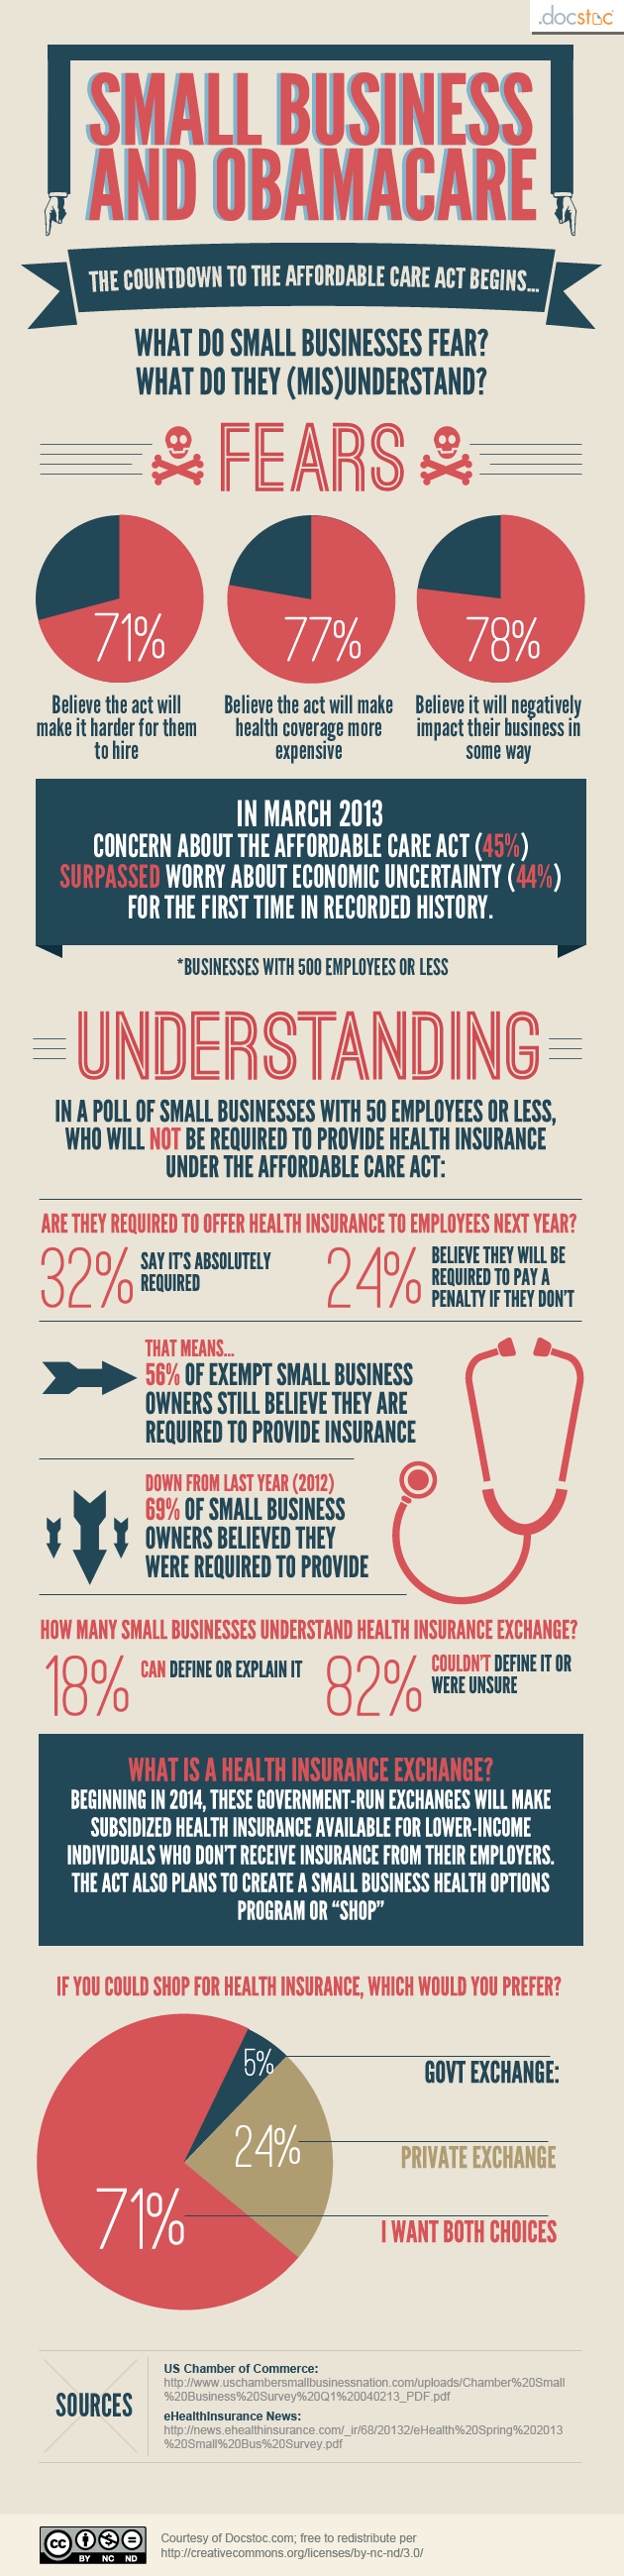 Small Business and Obamacare